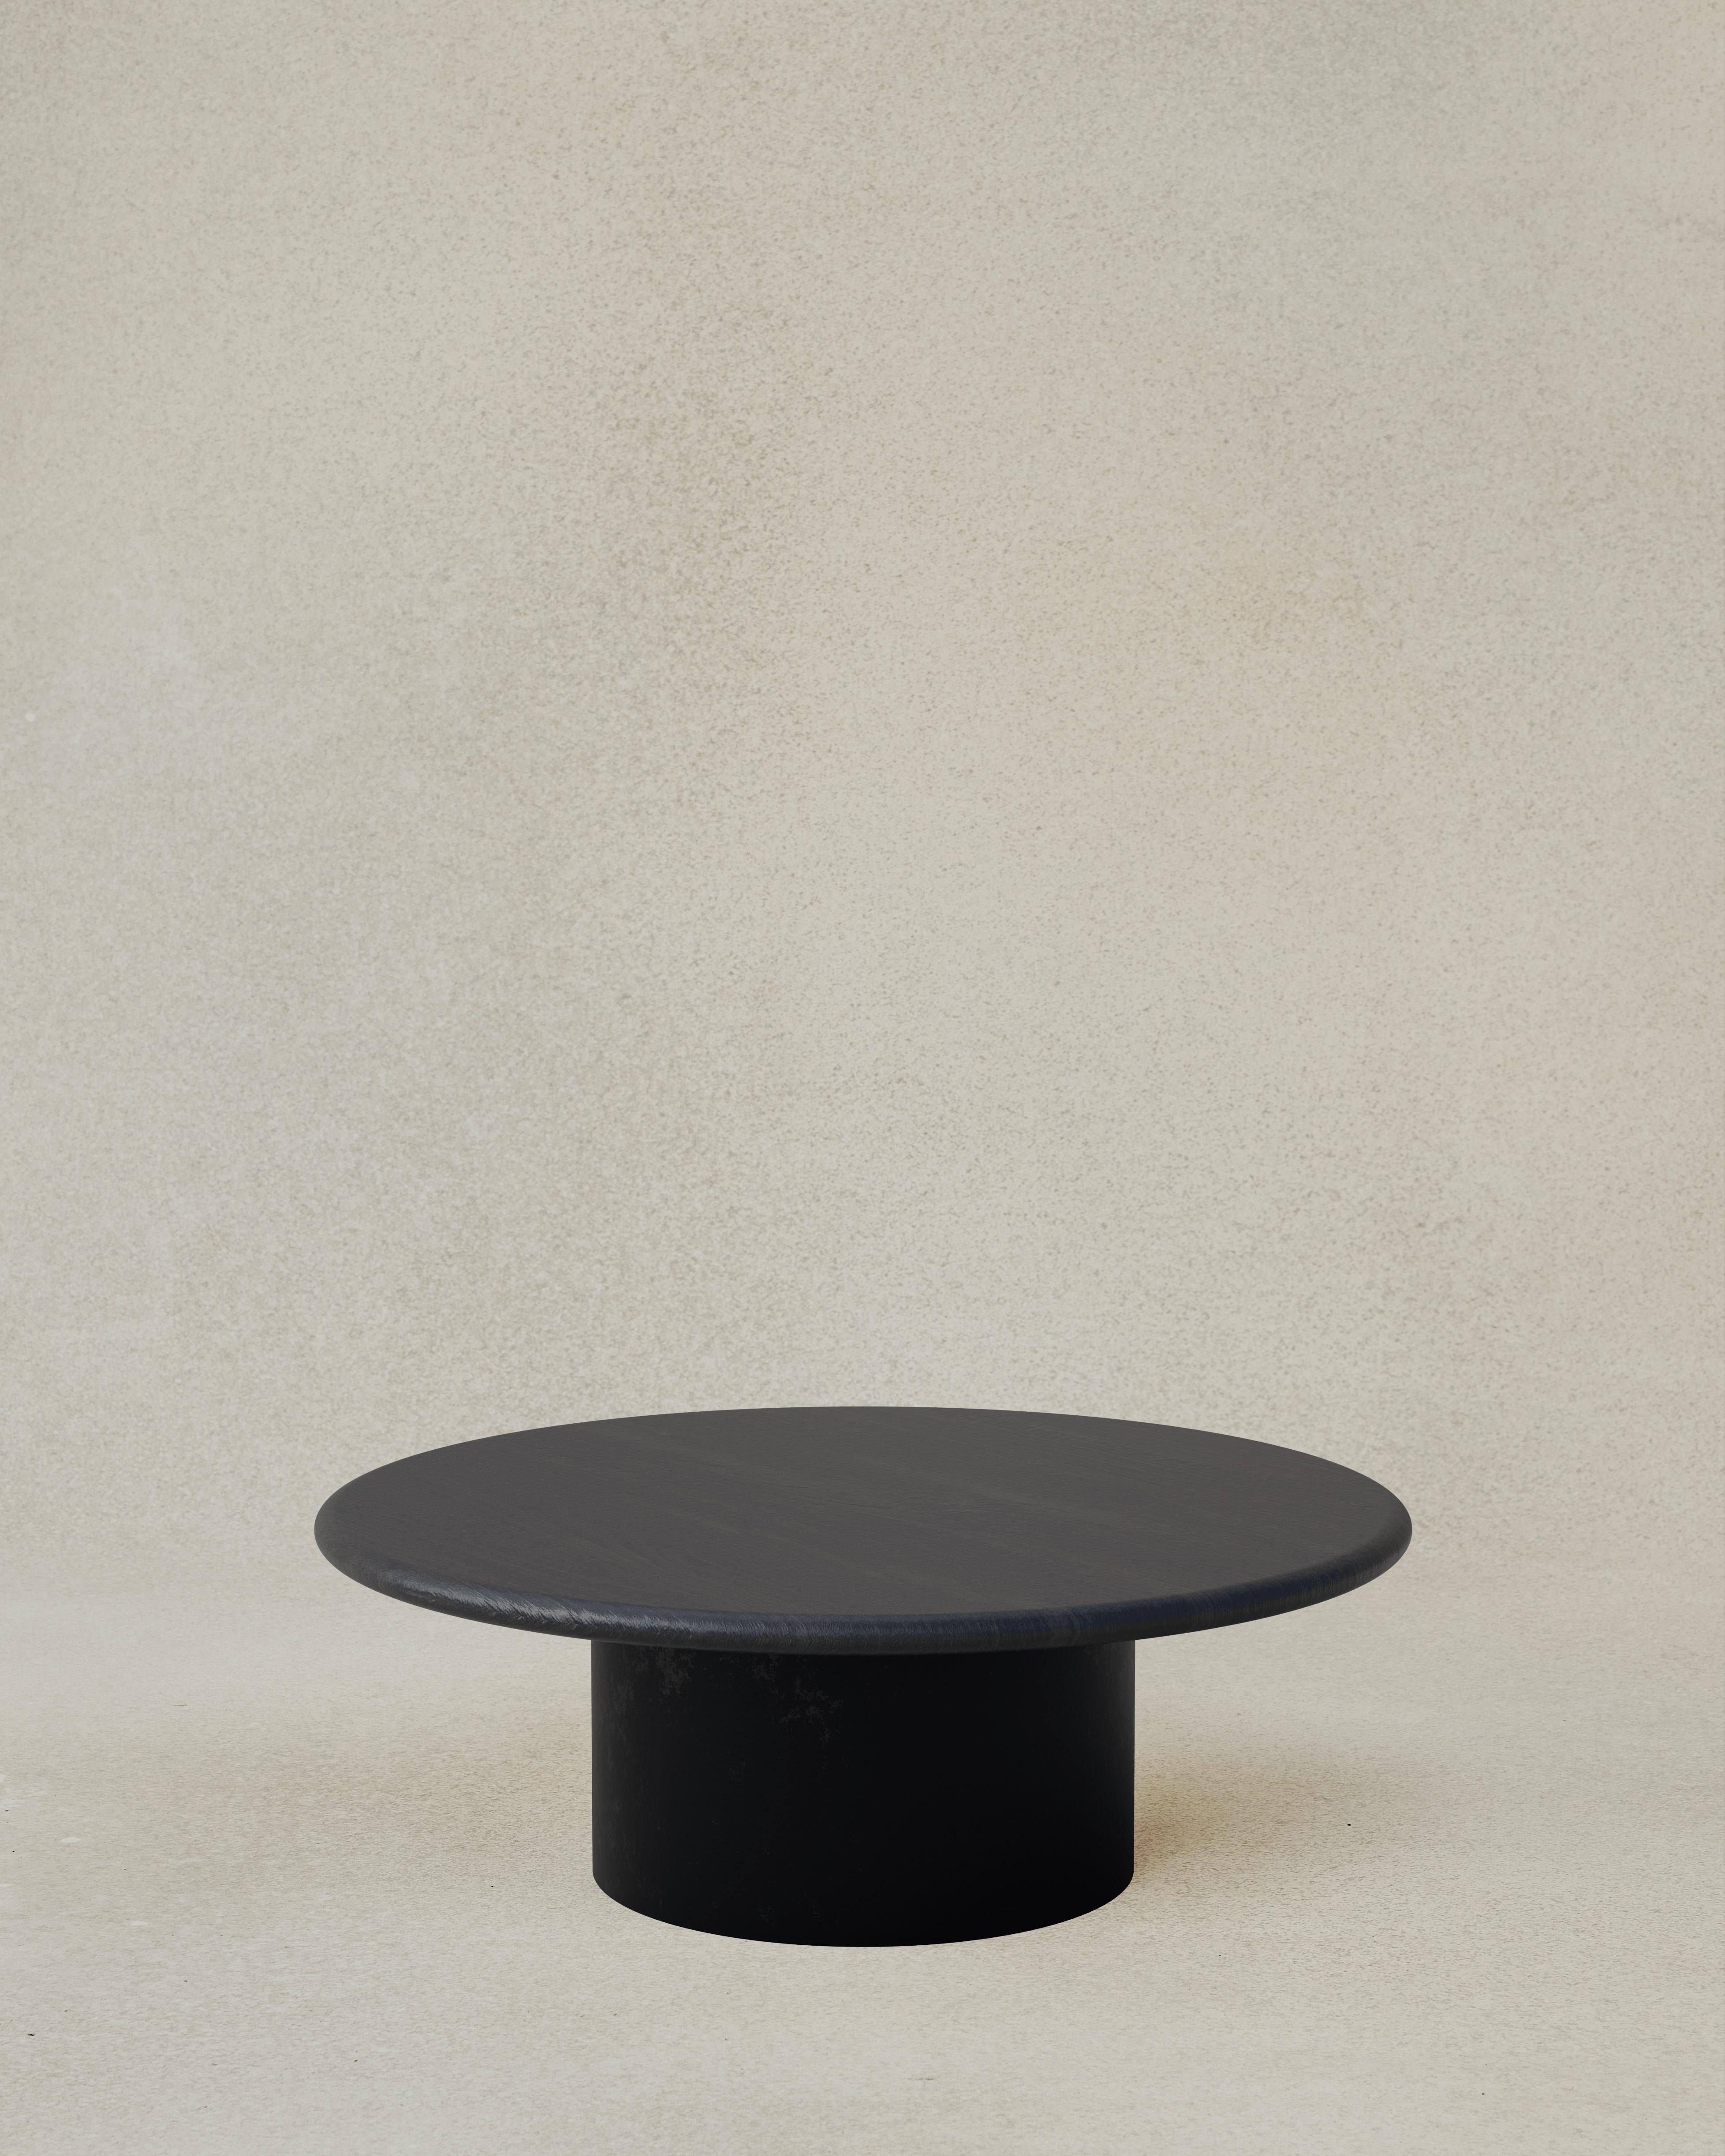 The Raindrop 800 is the second to largest coffee table, perfect for a mid sized space in your home paired with a side table, and now available in a range of finishes to suit any interior or style. The raindrops nestle together to form a cascading